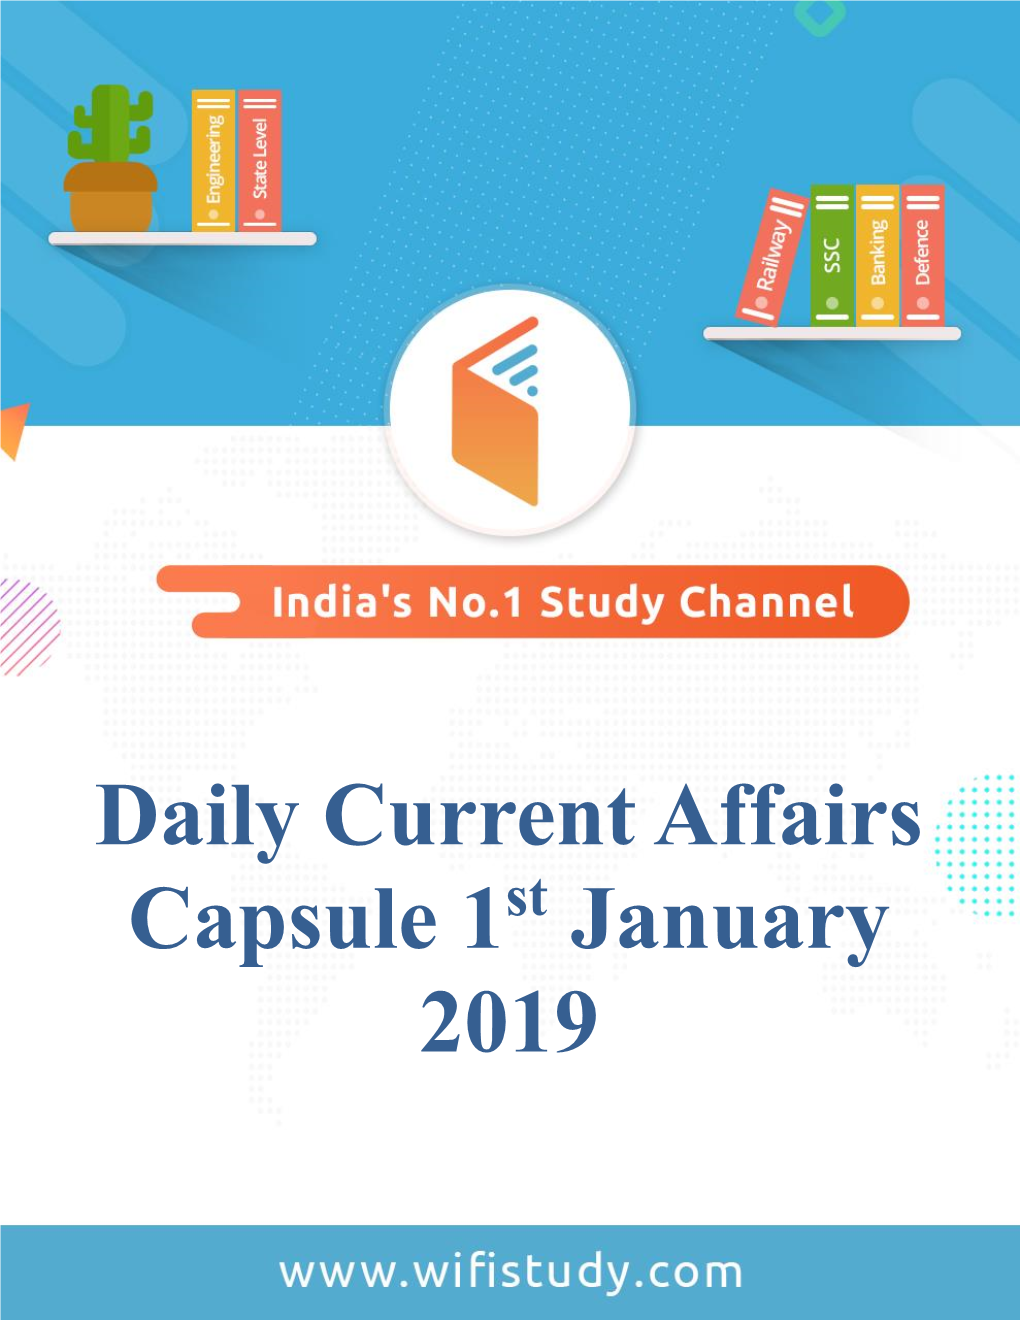 Daily Current Affairs Capsule 1St January 2019